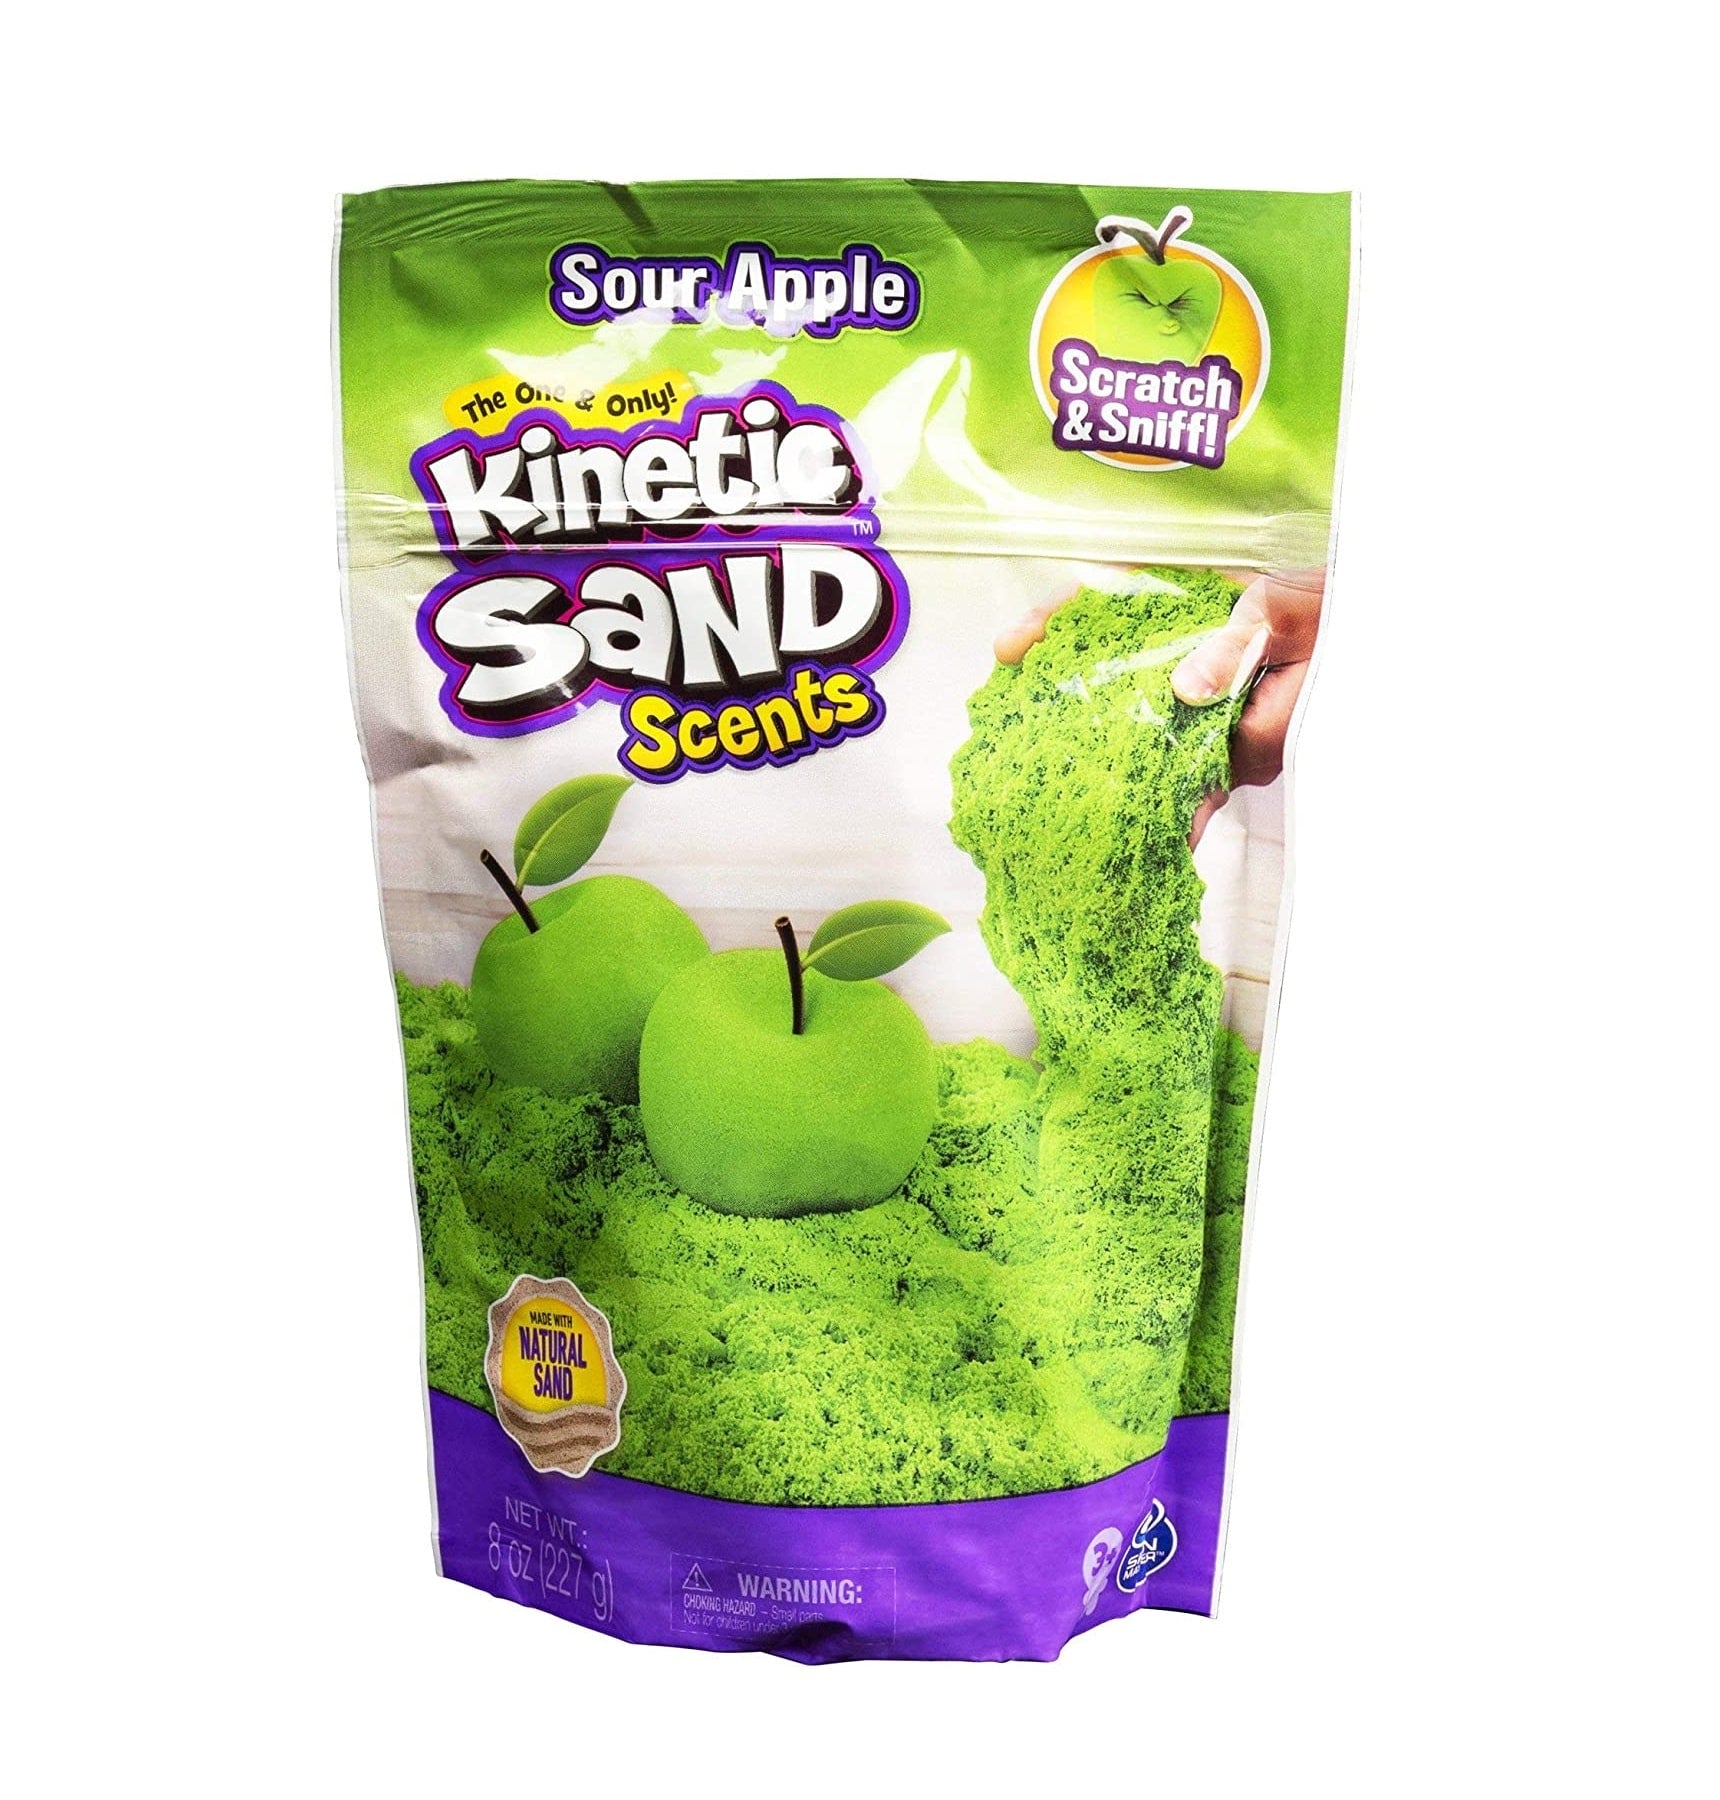 Buy Kinetic Sand Sweet Scents at BargainMax